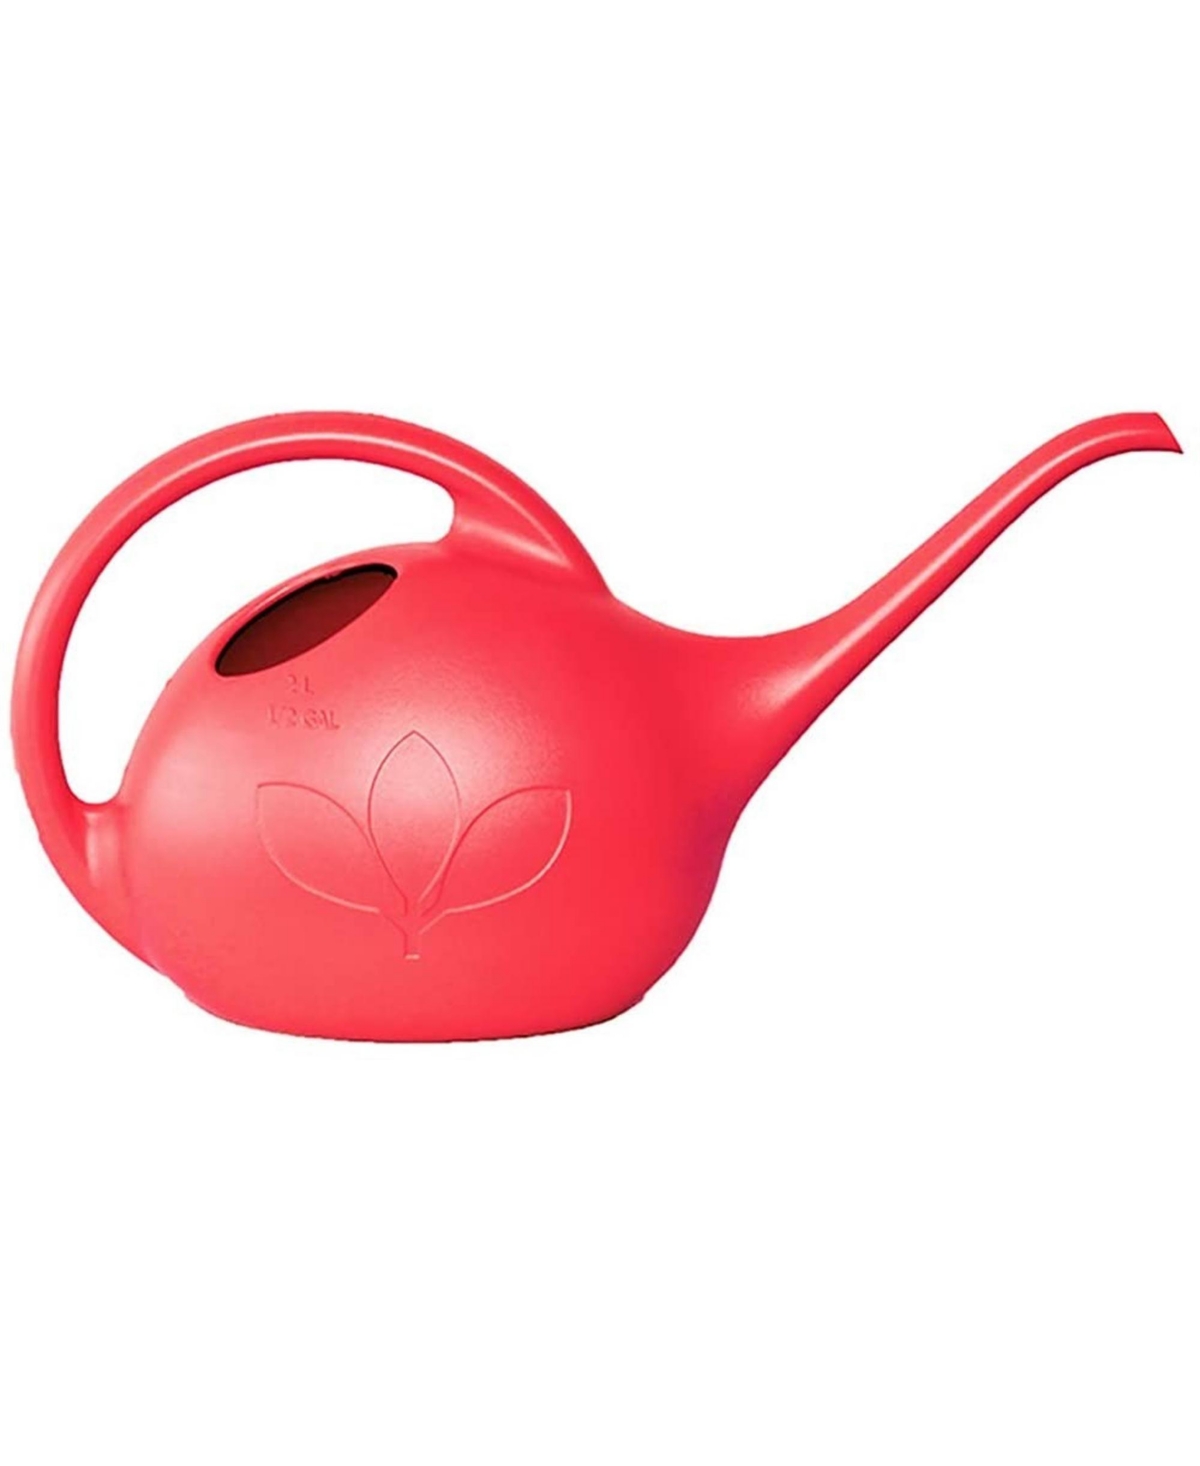 Indoor Plastic Long Spout Watering Can, Red, 0.5 Gallon - Red